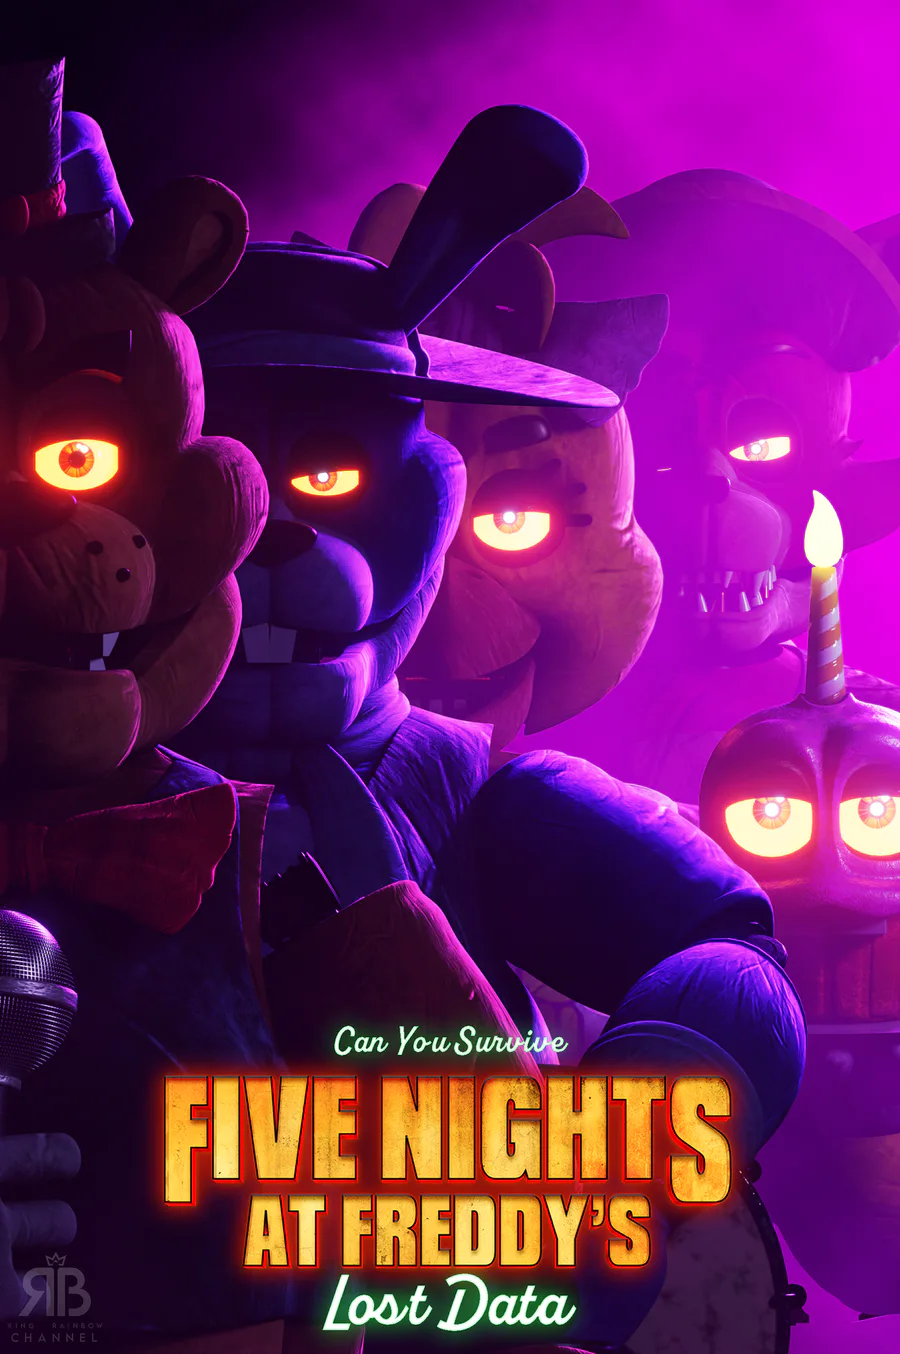 FNaF News Wire🎄🎅❄️ on X: 2 New Images For FIVE NIGHTS AT FREDDY'S  Featuring Bonnie And Foxy have been revealed Via a Gamejolt Project by  Scott Cawhton ( #FNAF #FNAFMovie  #FiveNightsAtFreddys  /